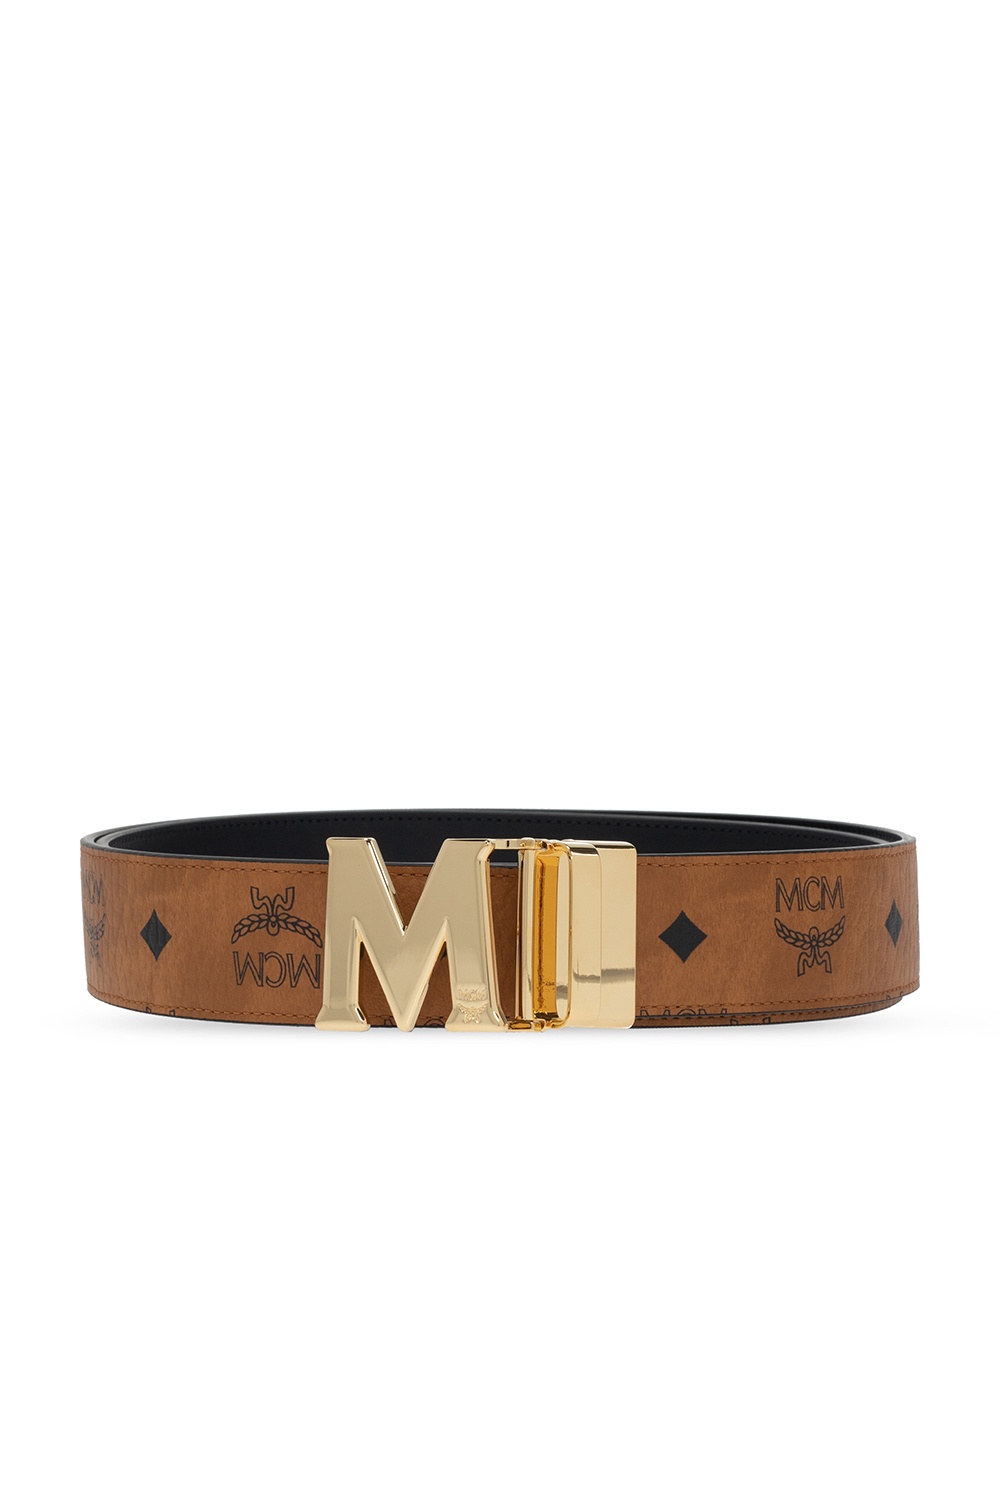 How to tell if your MCM belt is REAL or FAKE? **IMPORTANT DETAILS